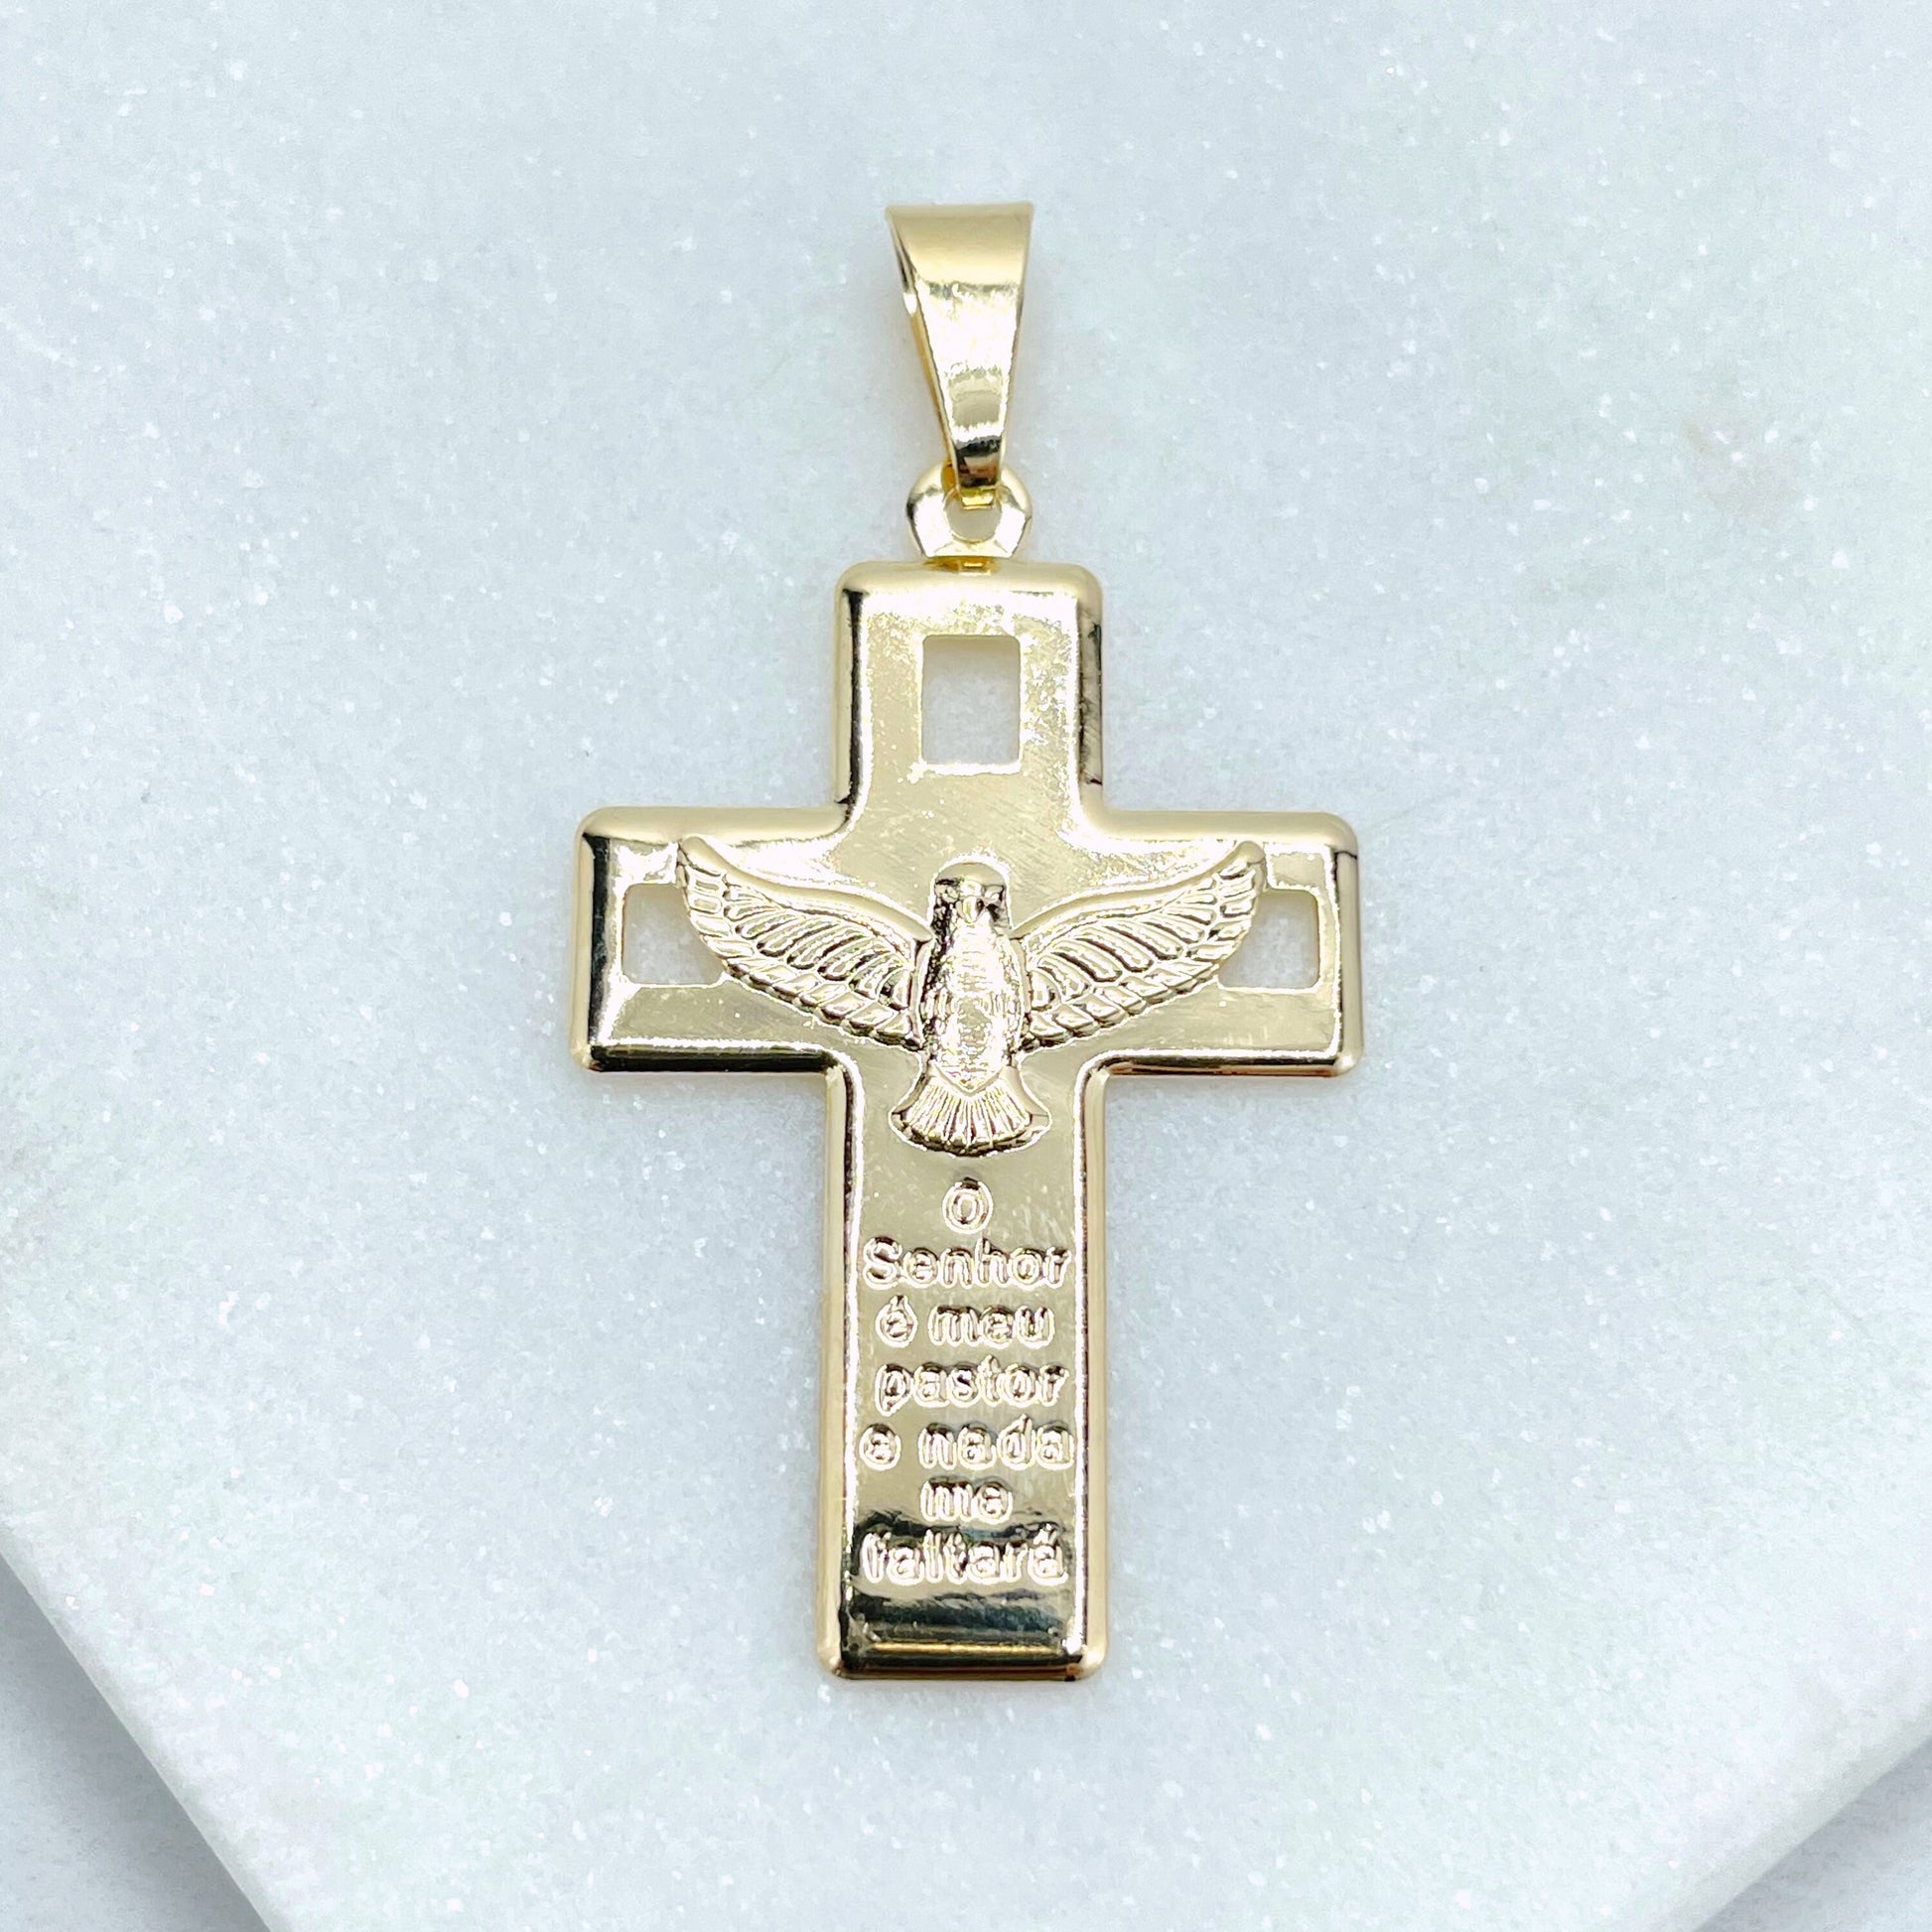 18K Gold Filled Cross Charms Pendant with Dove & Portuguese Bible 23 Psalm description, Wholesale Jewelry Making Supplies